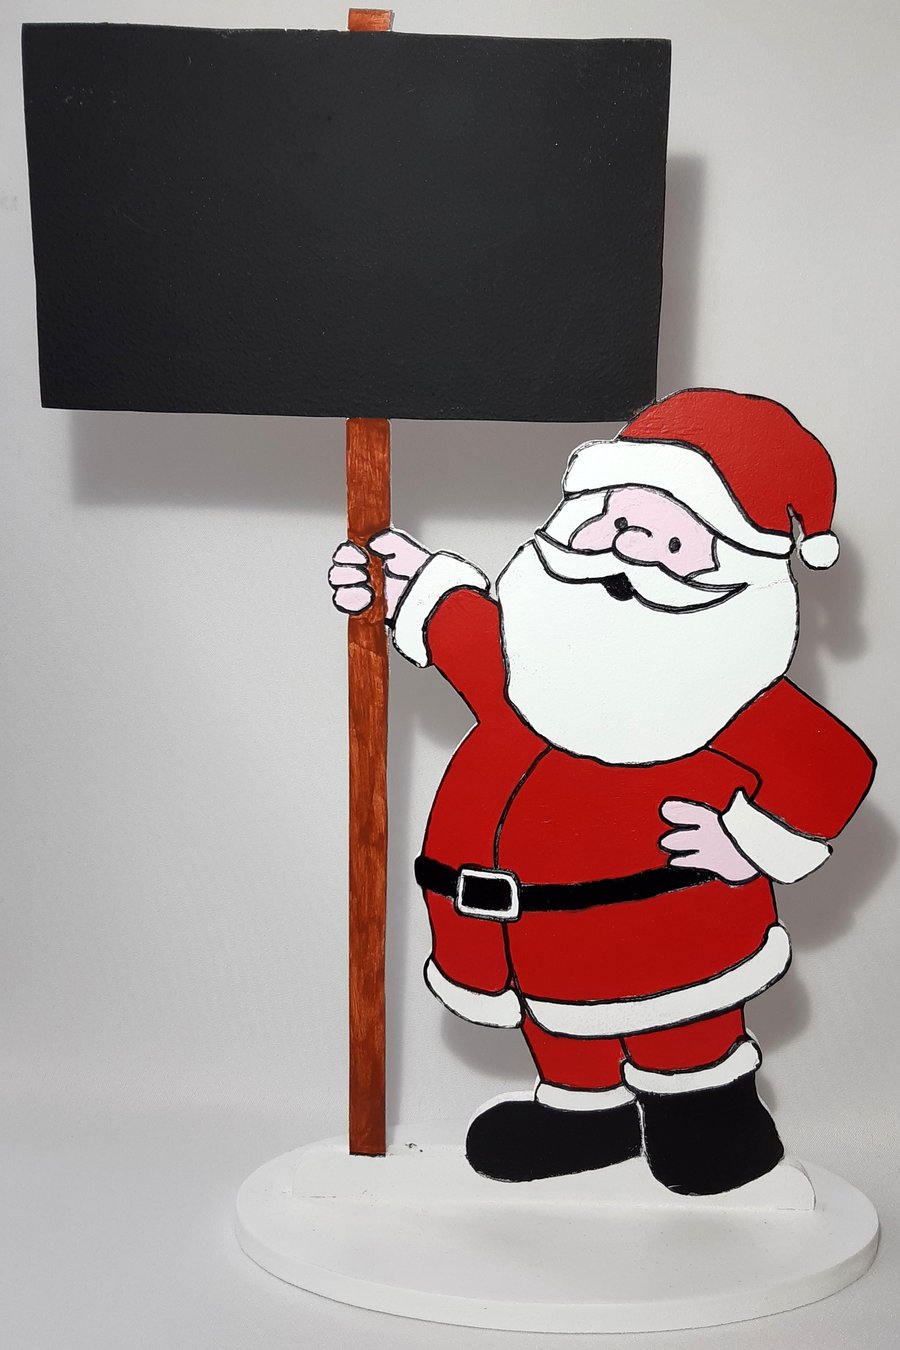 Santa holding a chalkboard placard. Ideal for counting down to Chriatmas (OR13)